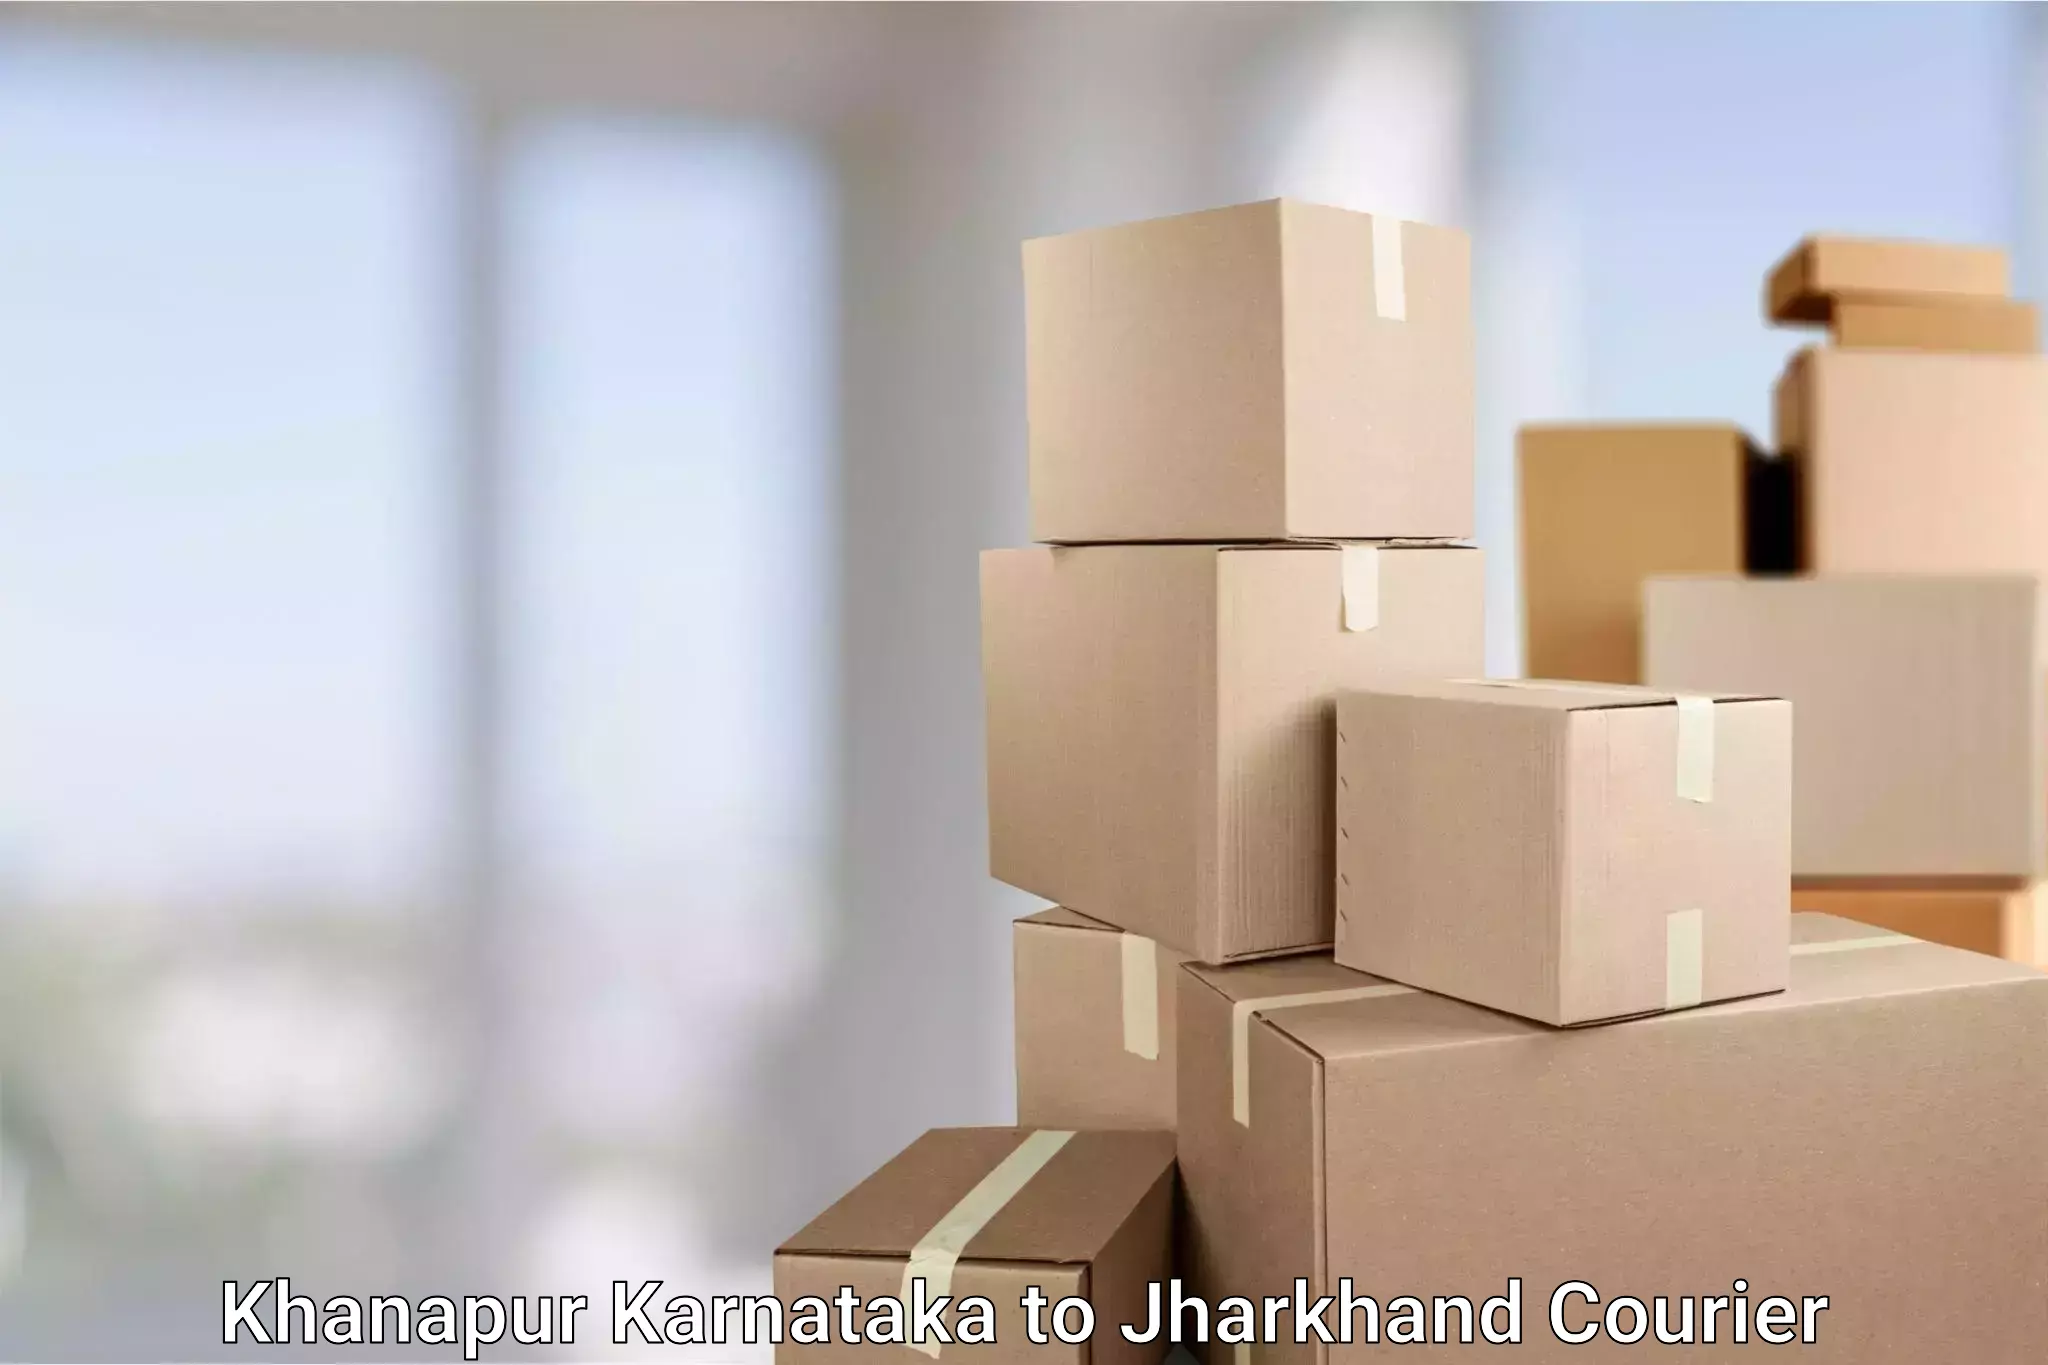 Specialized courier services Khanapur Karnataka to Chandil